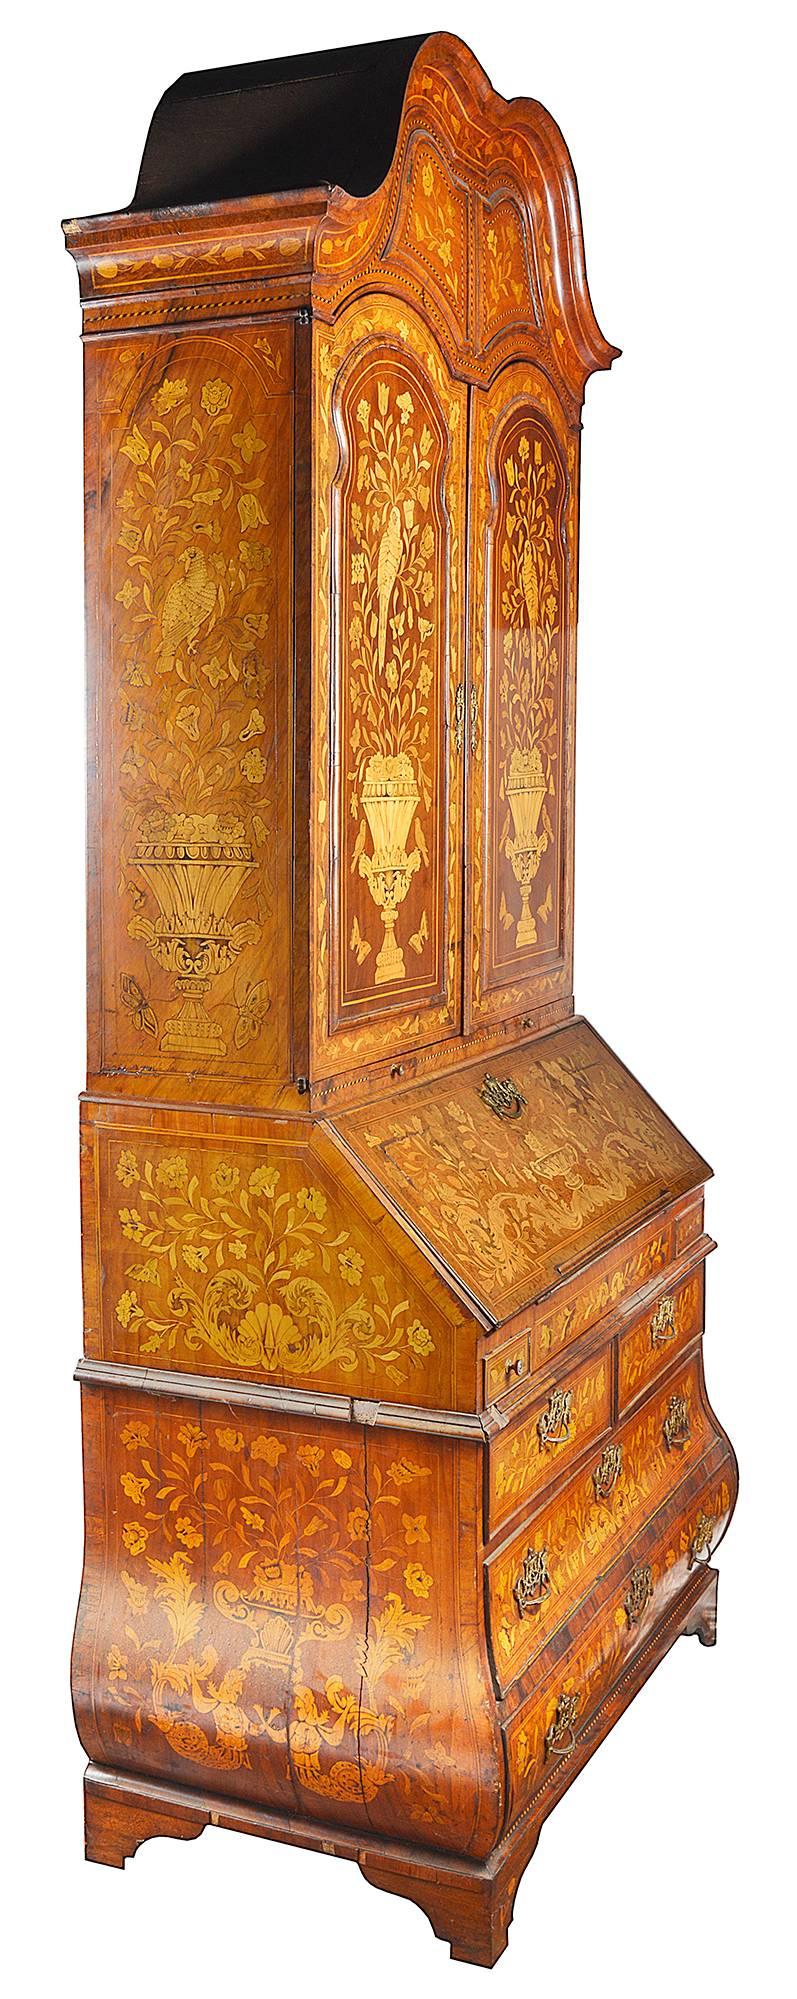 A very good quality 18th century Dutch marquetry inlaid bureau bookcase. Having a double dome top cornice, two panel doors, a fall front and bombe shaped base. The wonderfully bold and fine quality inlaid marquetry detail of flowers, birds and